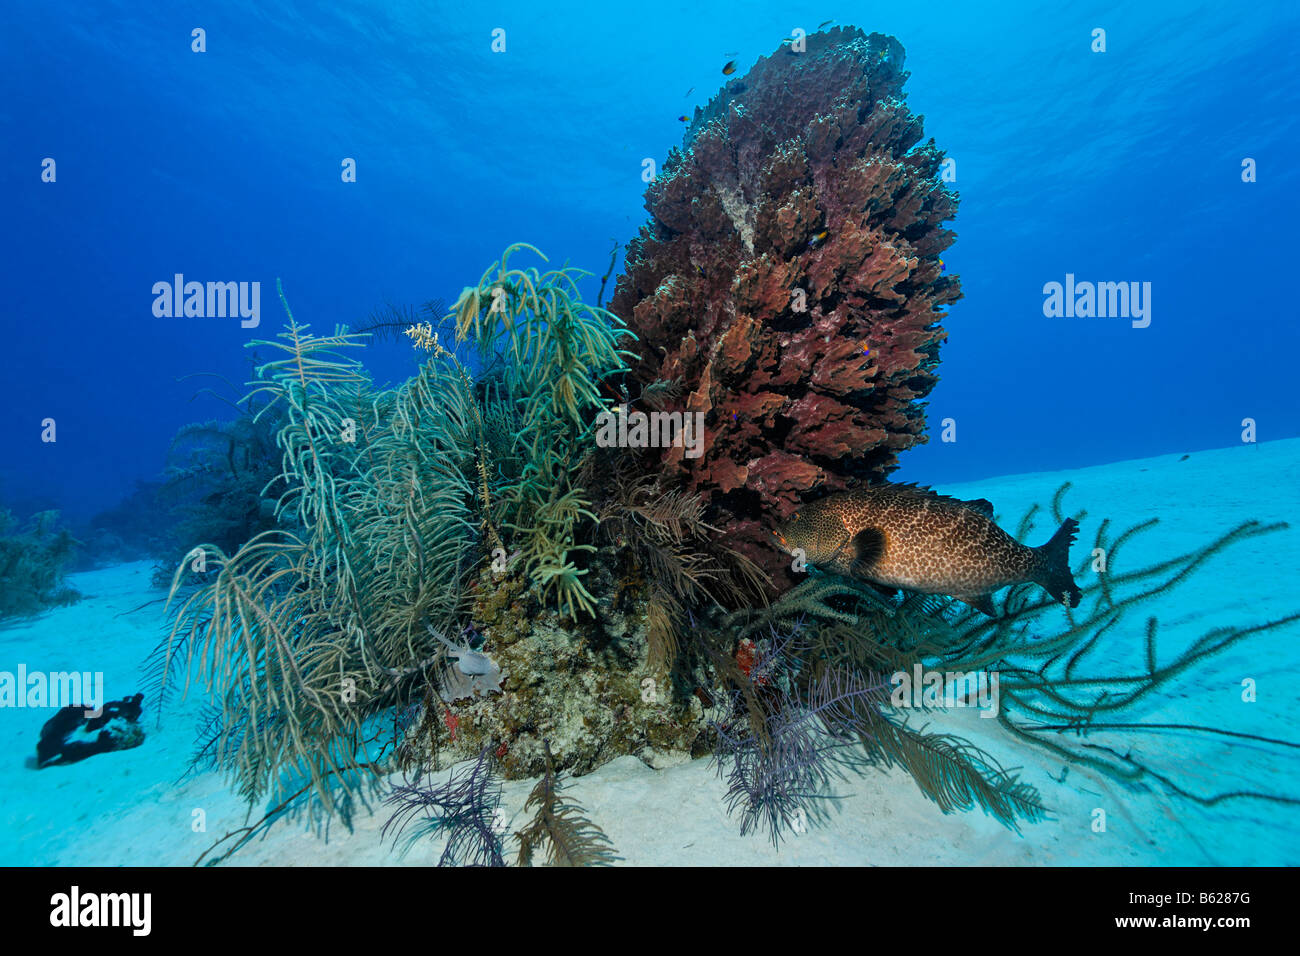 Tiger grouper (Mycteroperca tigris) in front of a barrel sponge (Xestopsongia muta) and various types of coral, surrounded by a Stock Photo